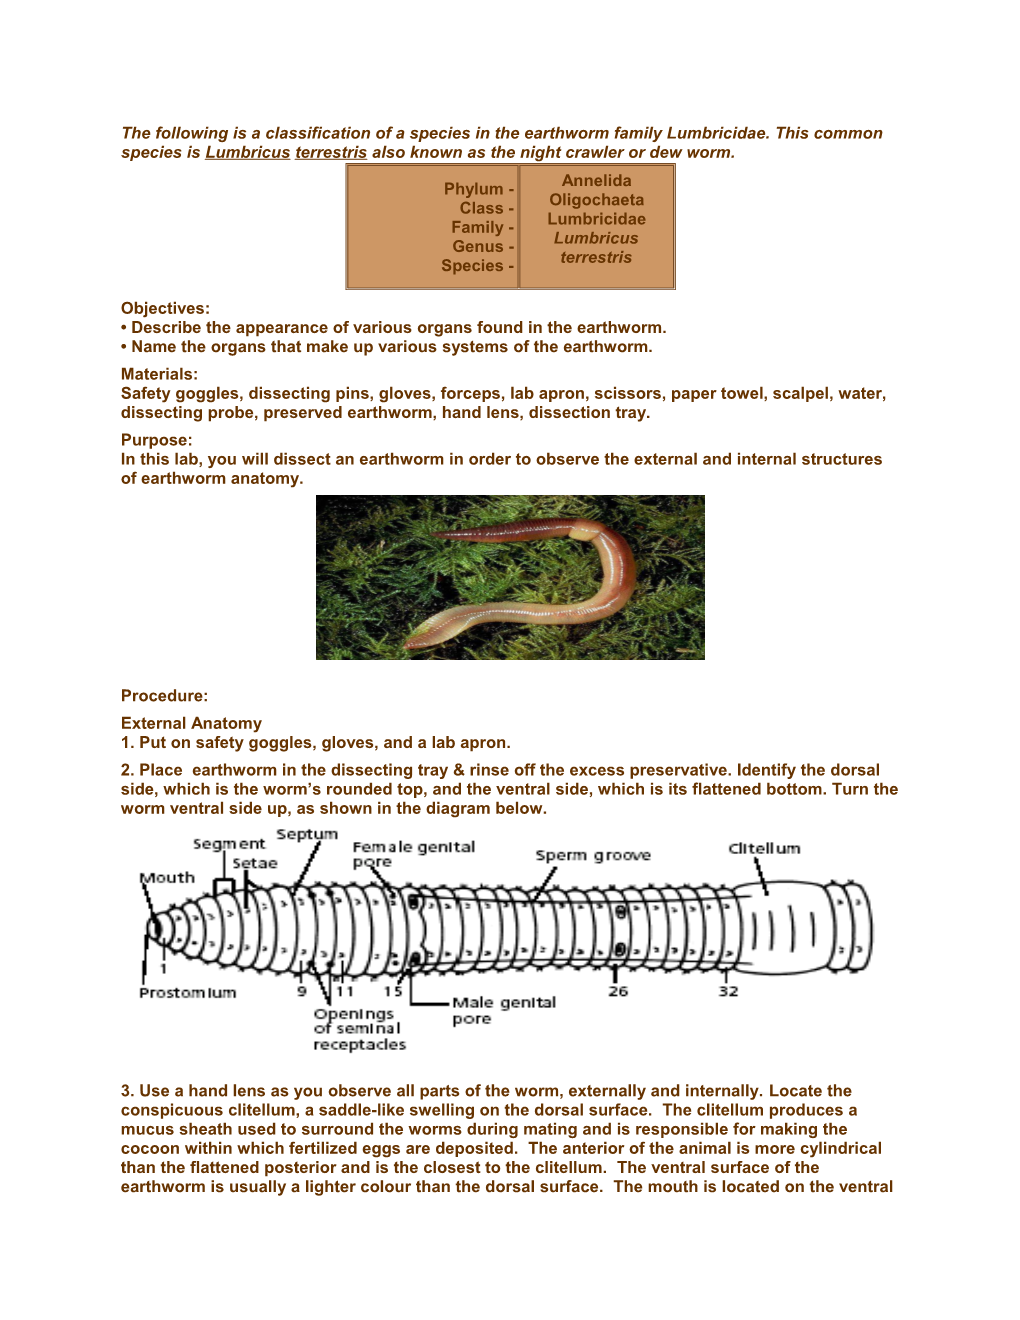 The Following Is a Classification of a Species in the Earthworm Family Lumbricidae. This